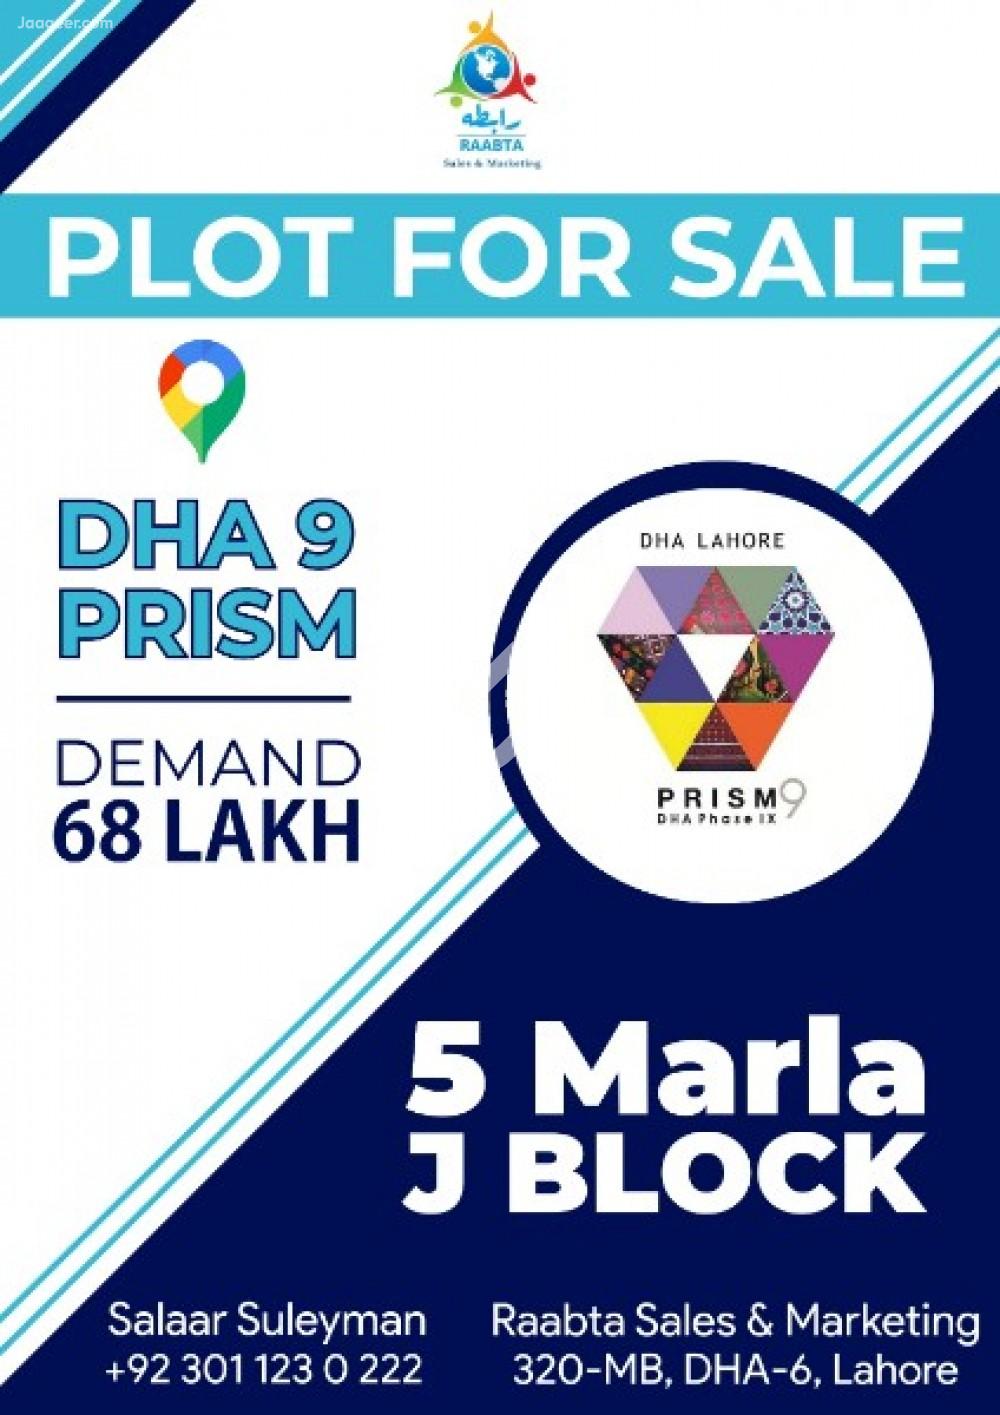 View  5 Marla Residential Plot For Sale In DHA Phase 9 Prism Block  in DHA Phase 9, Lahore